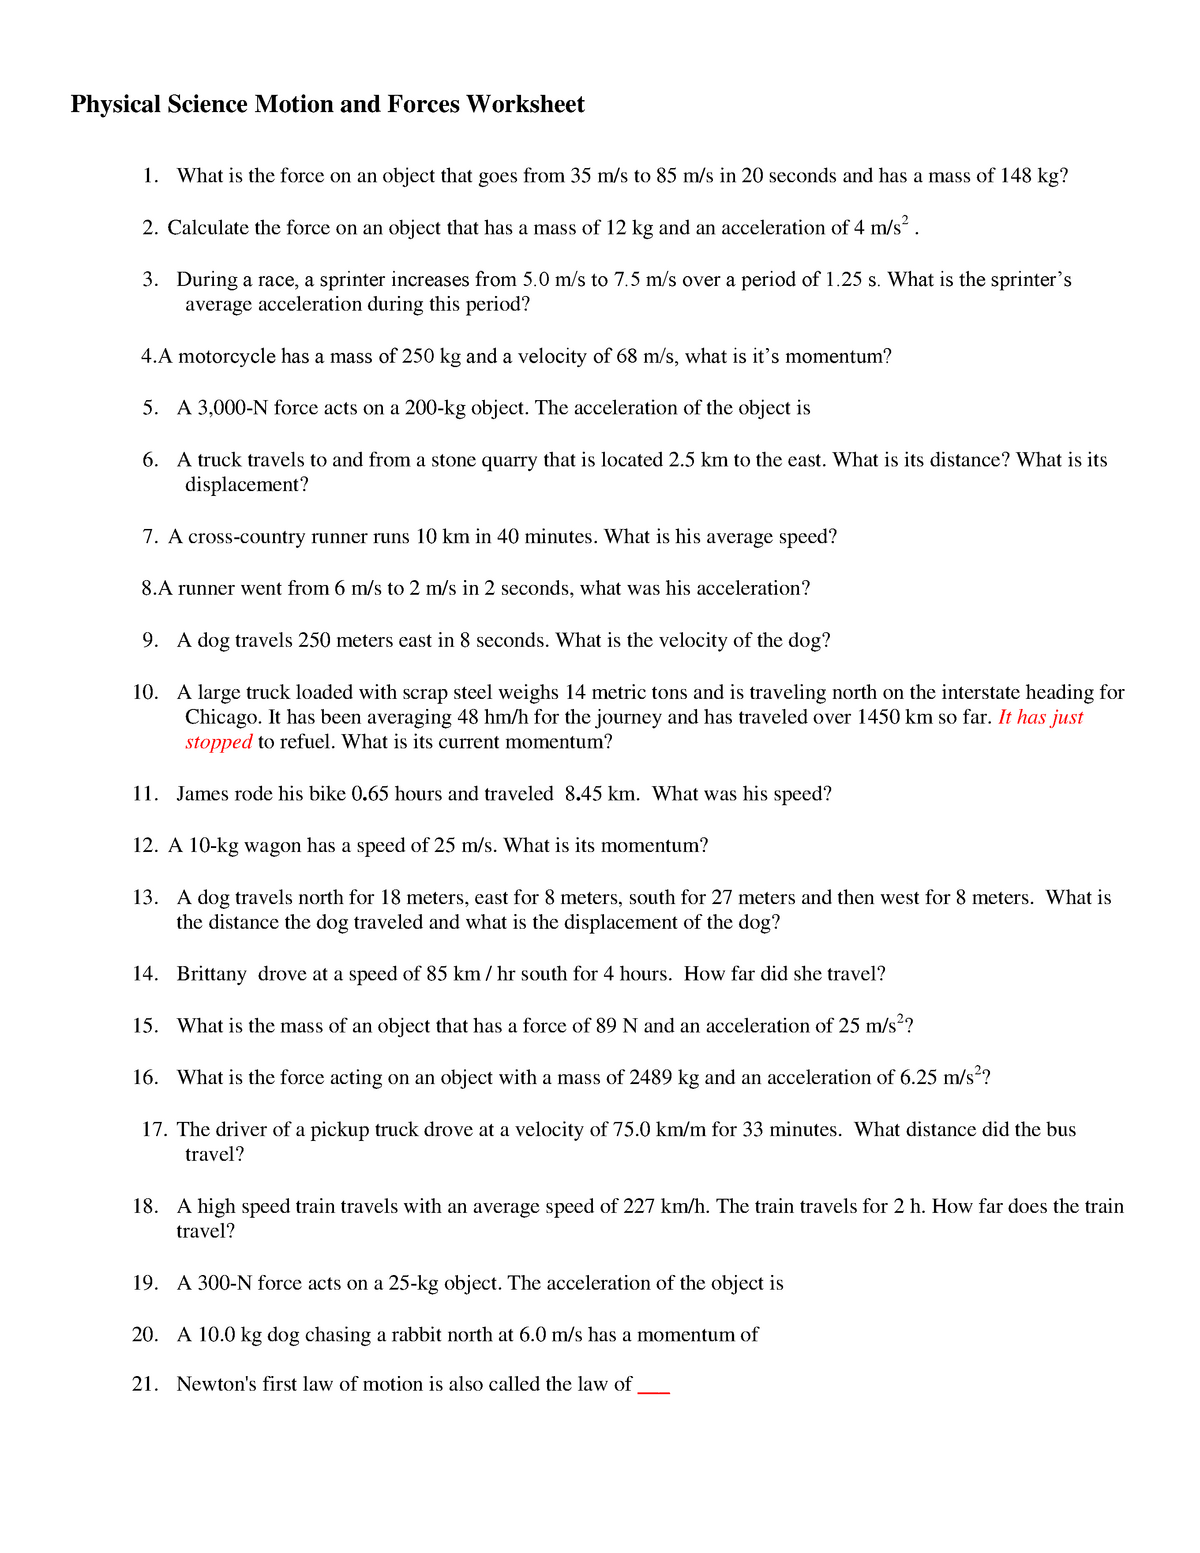 Motion and forces worksheet with key - Principles of Sport and Intended For Calculating Force Worksheet Answers